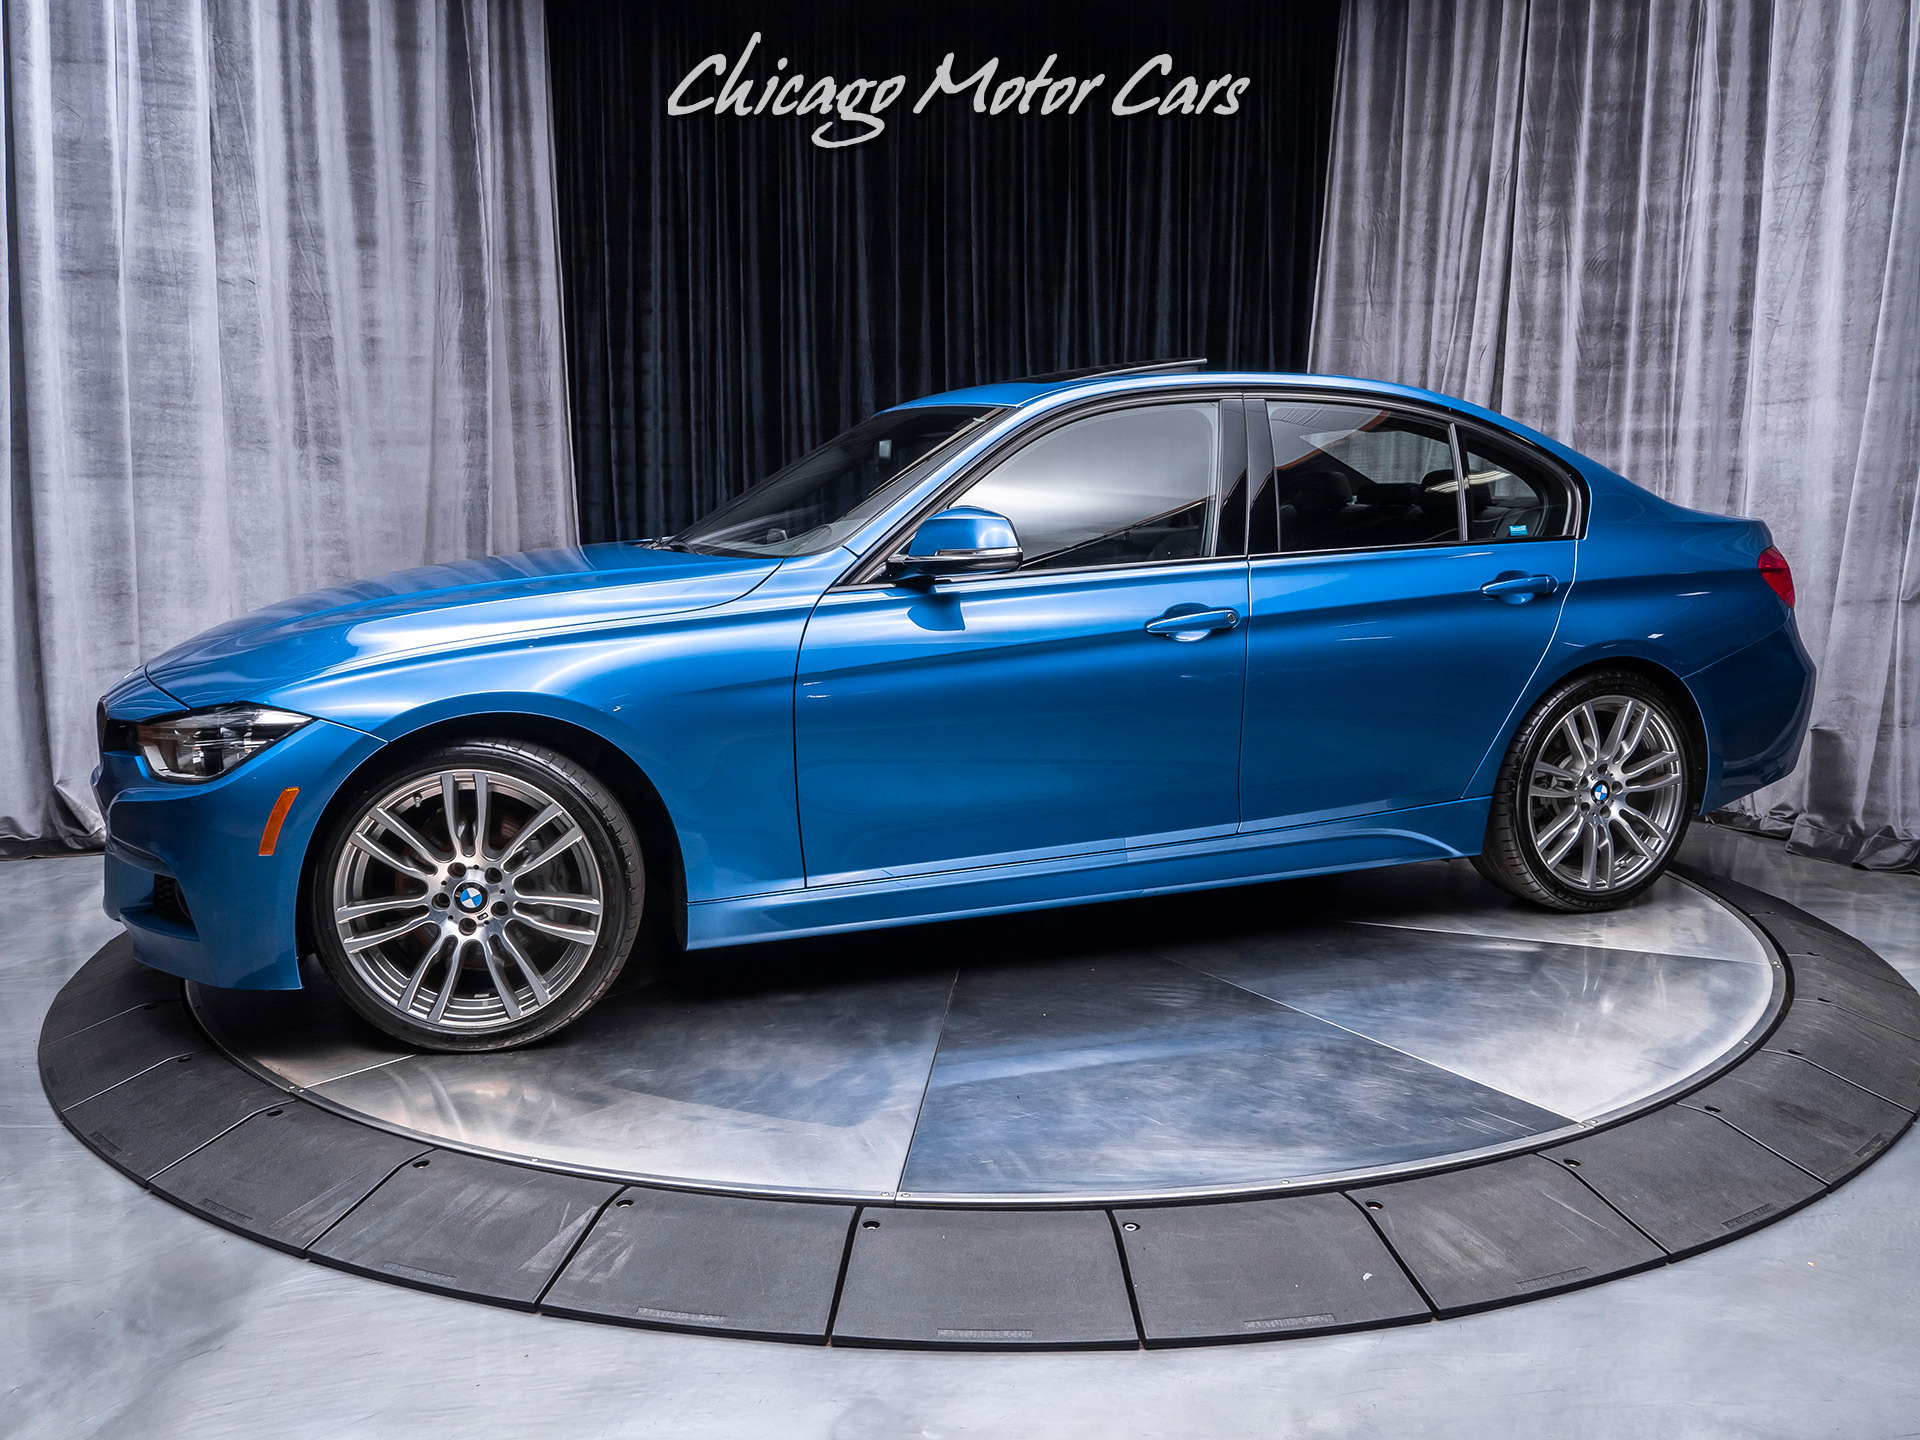 Used 2016 Bmw 340i Rwd Sedan M Sport Package For Sale Special Pricing Chicago Motor Cars Stock 15968